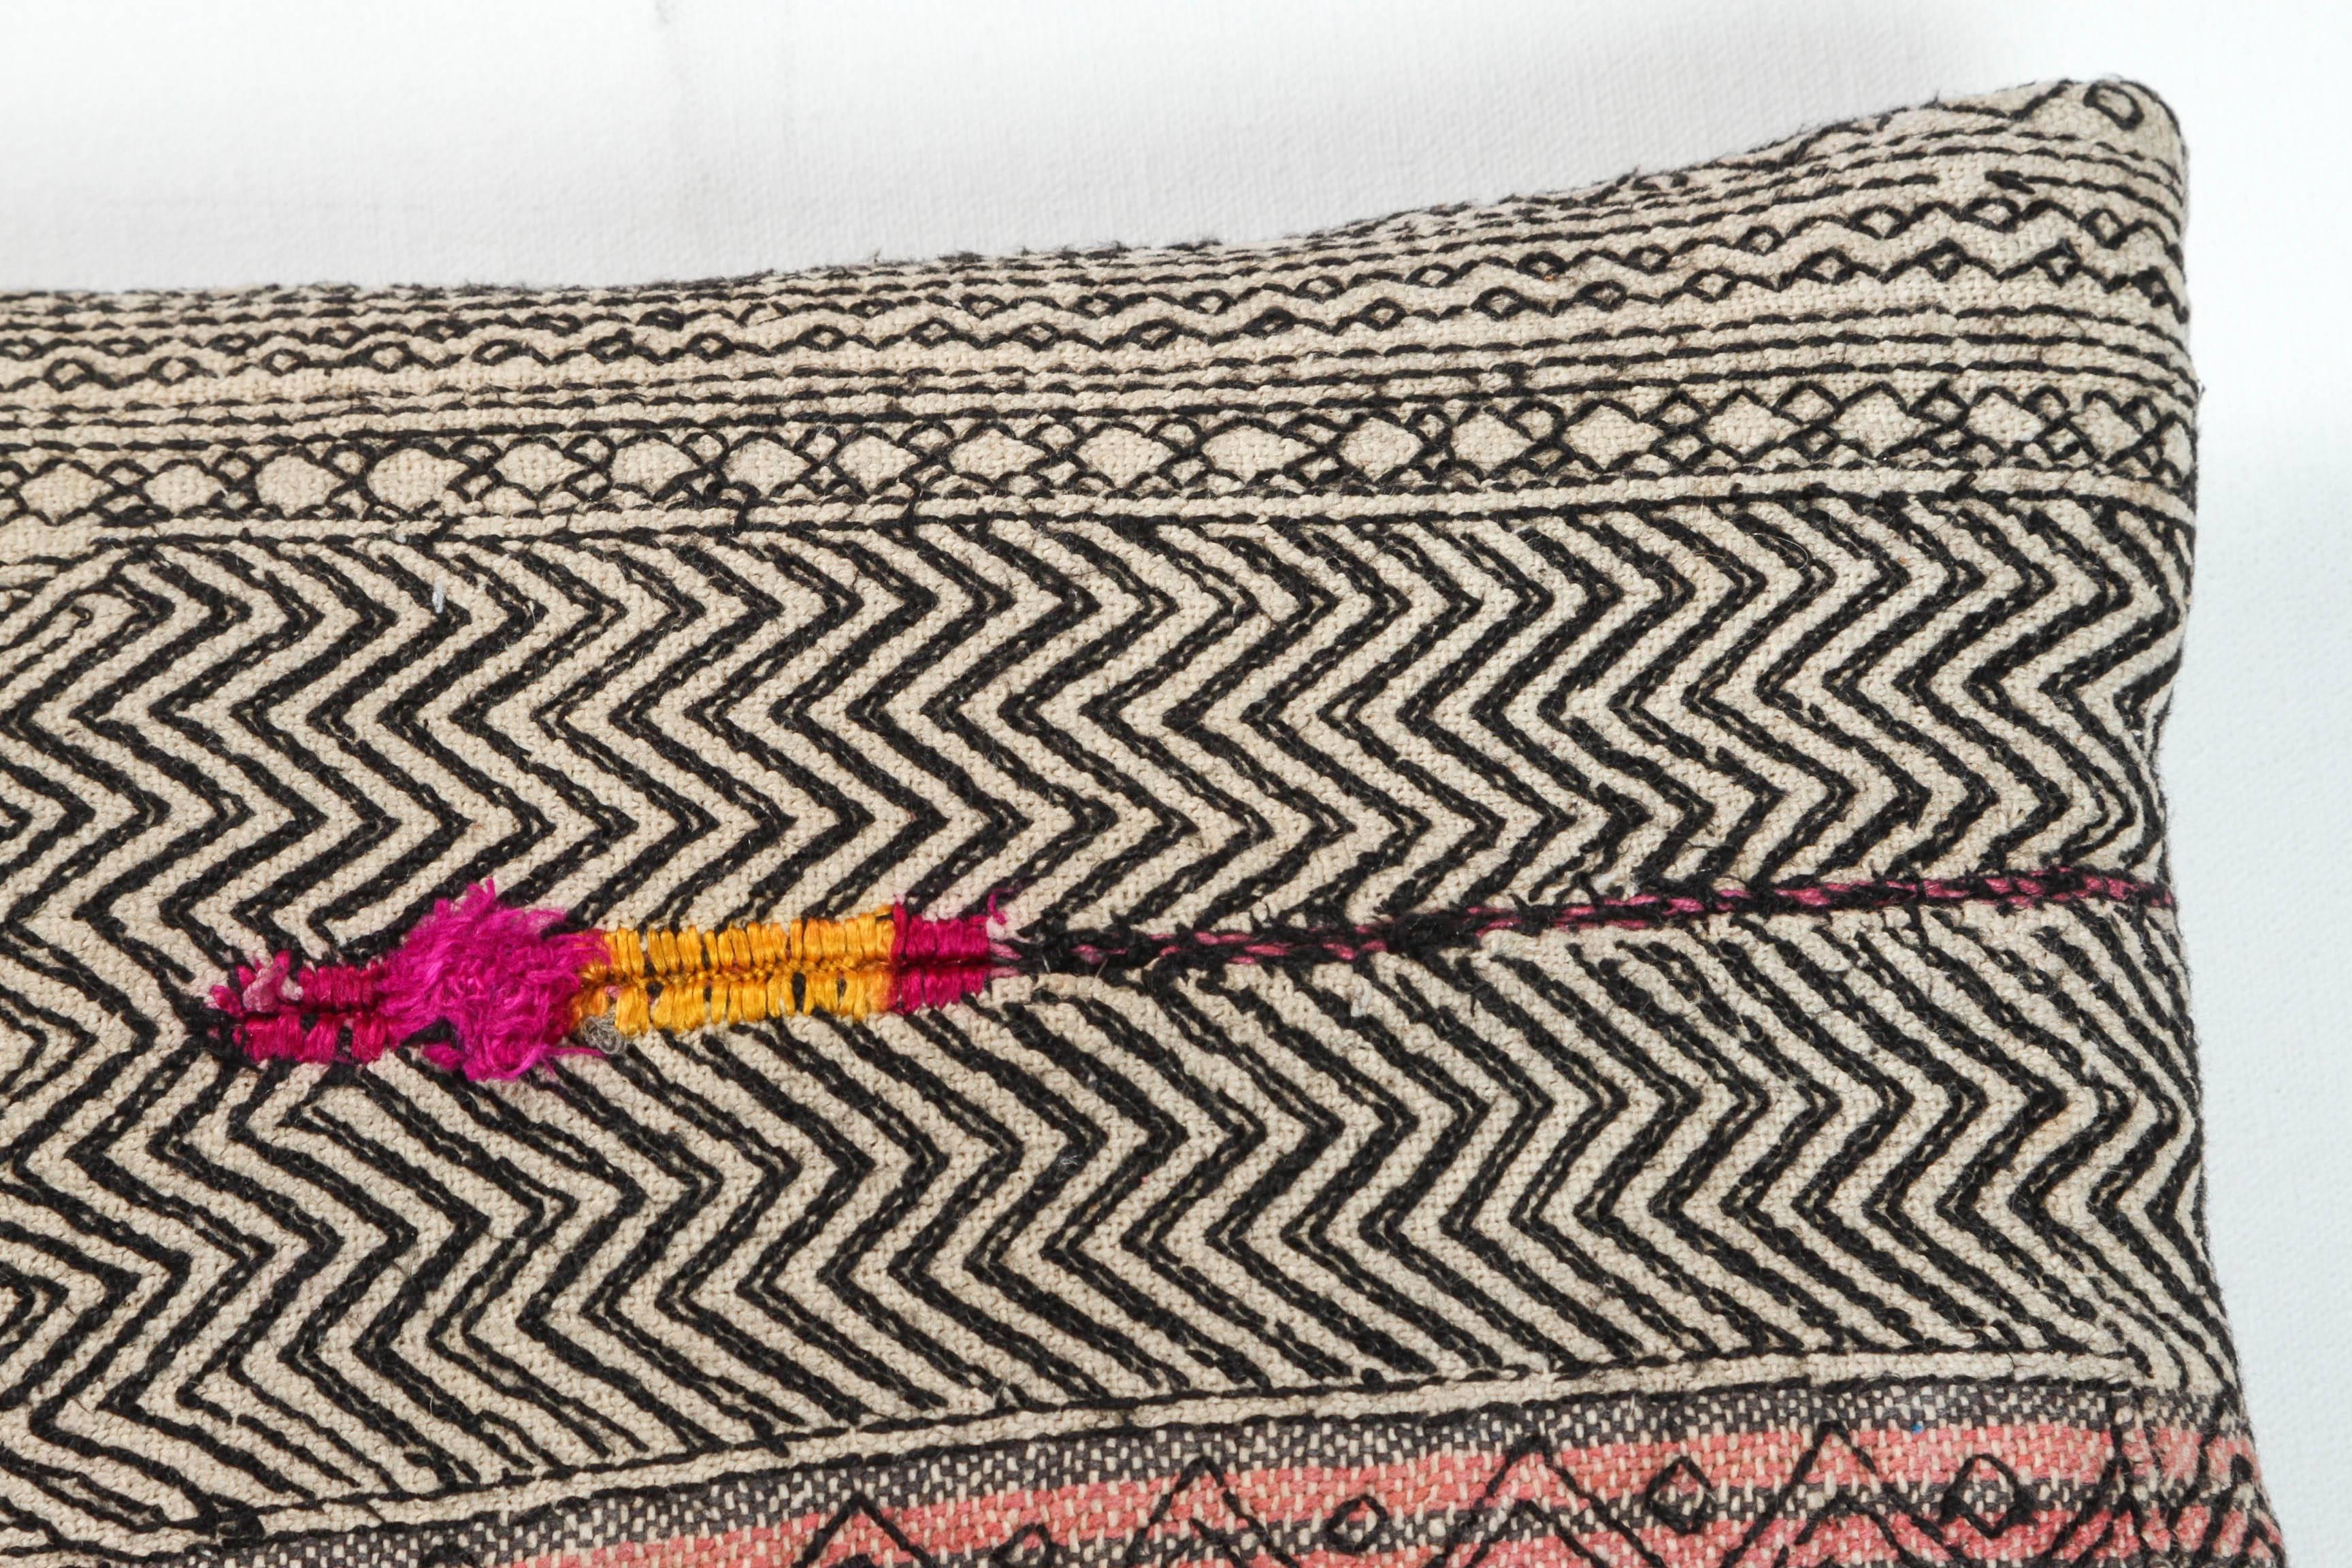 Indian Afghani Nuristan Lumbar Pillow. Black, Ivory, Pink, Fuchia and Gold.  For Sale